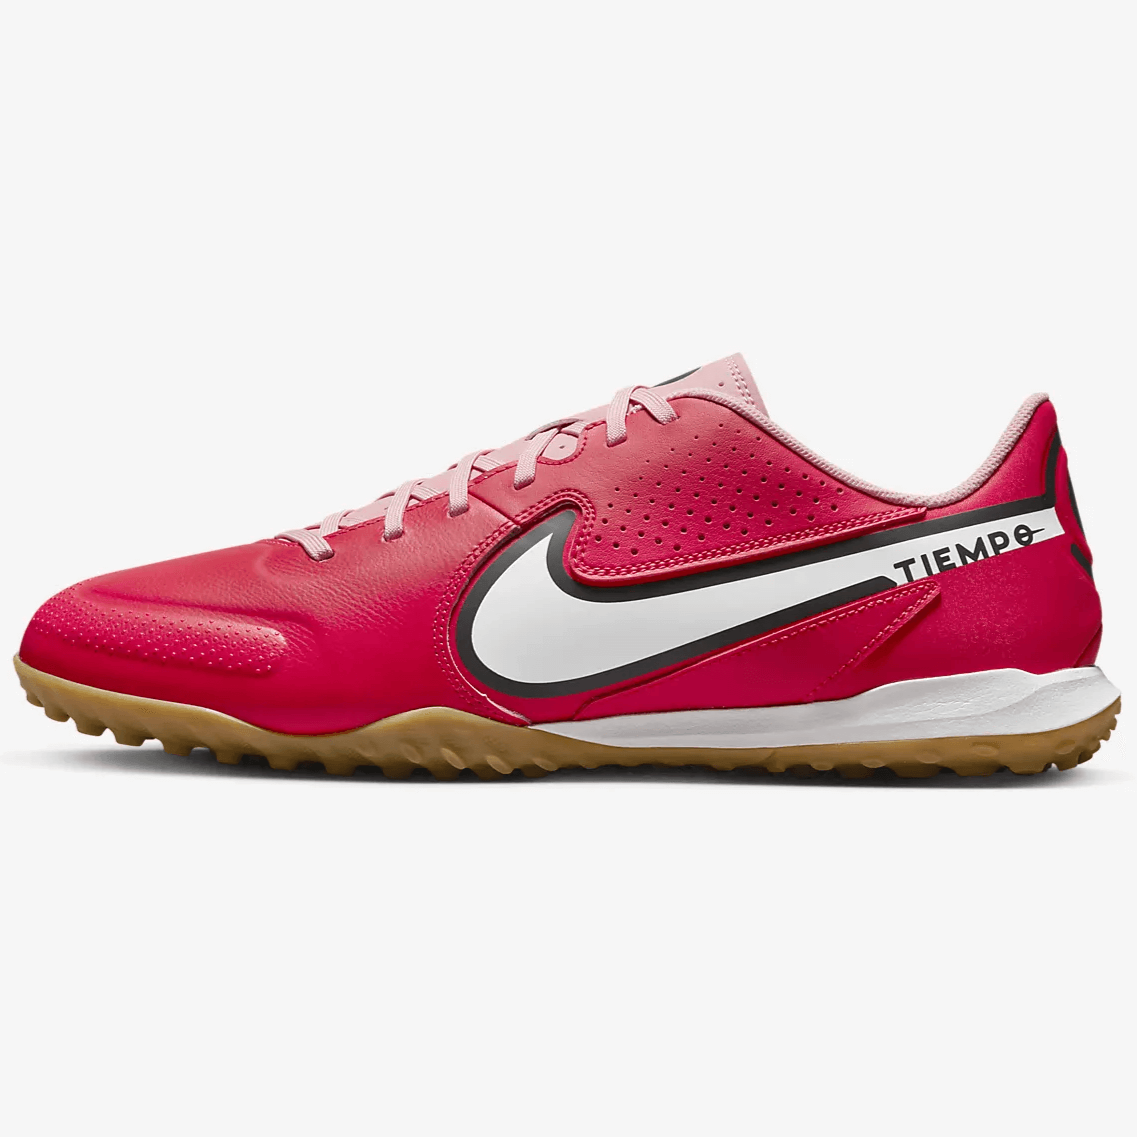 Nike Legend 9 Academy Turf - Red - White (Side 1)